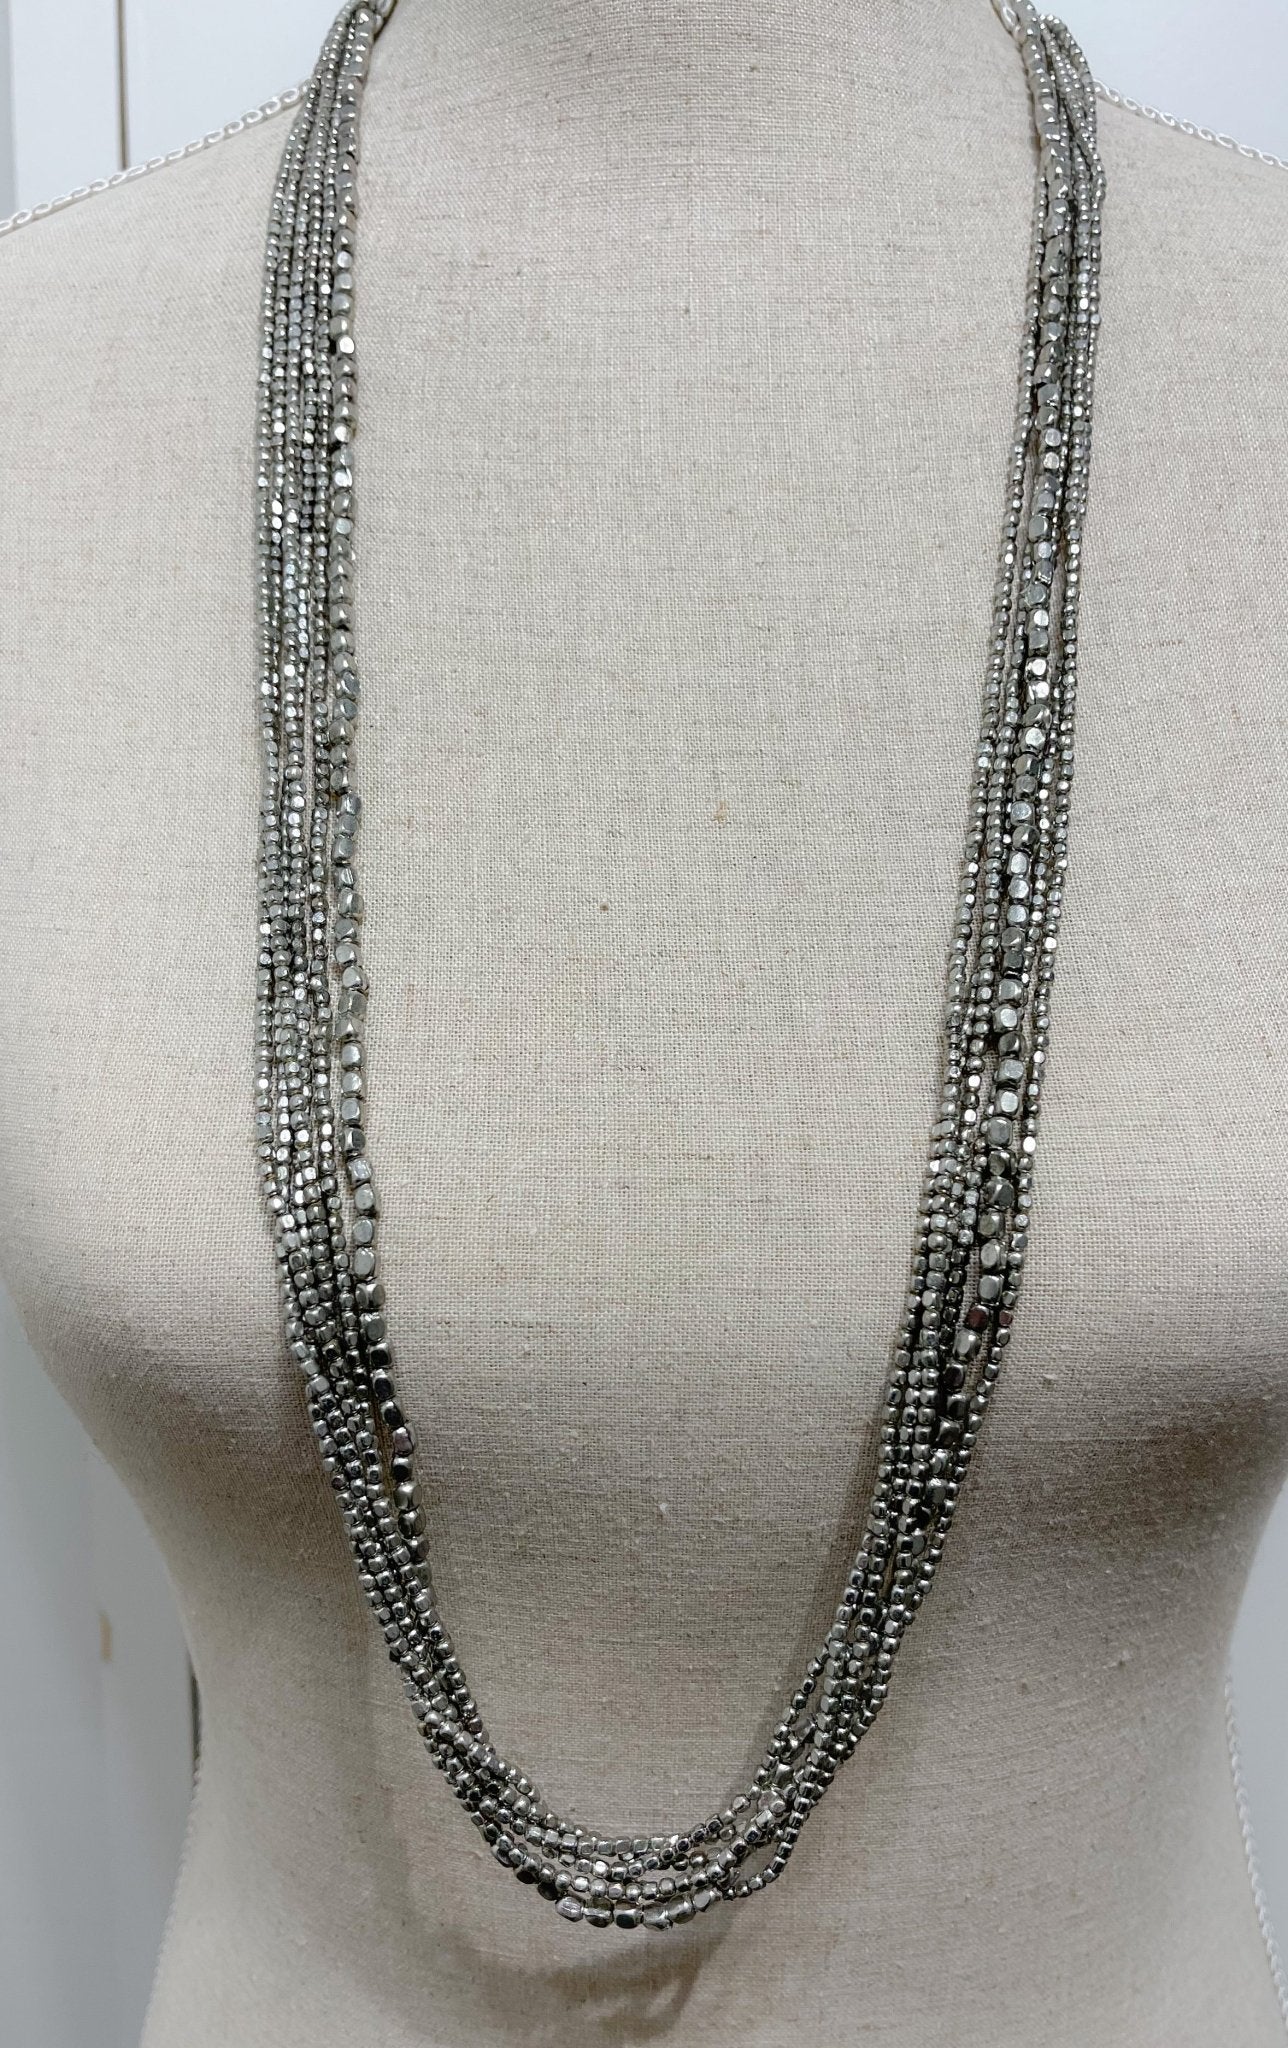 Small Nugget Necklace Silvertone - The Nancy Smillie Shop - Art, Jewellery & Designer Gifts Glasgow